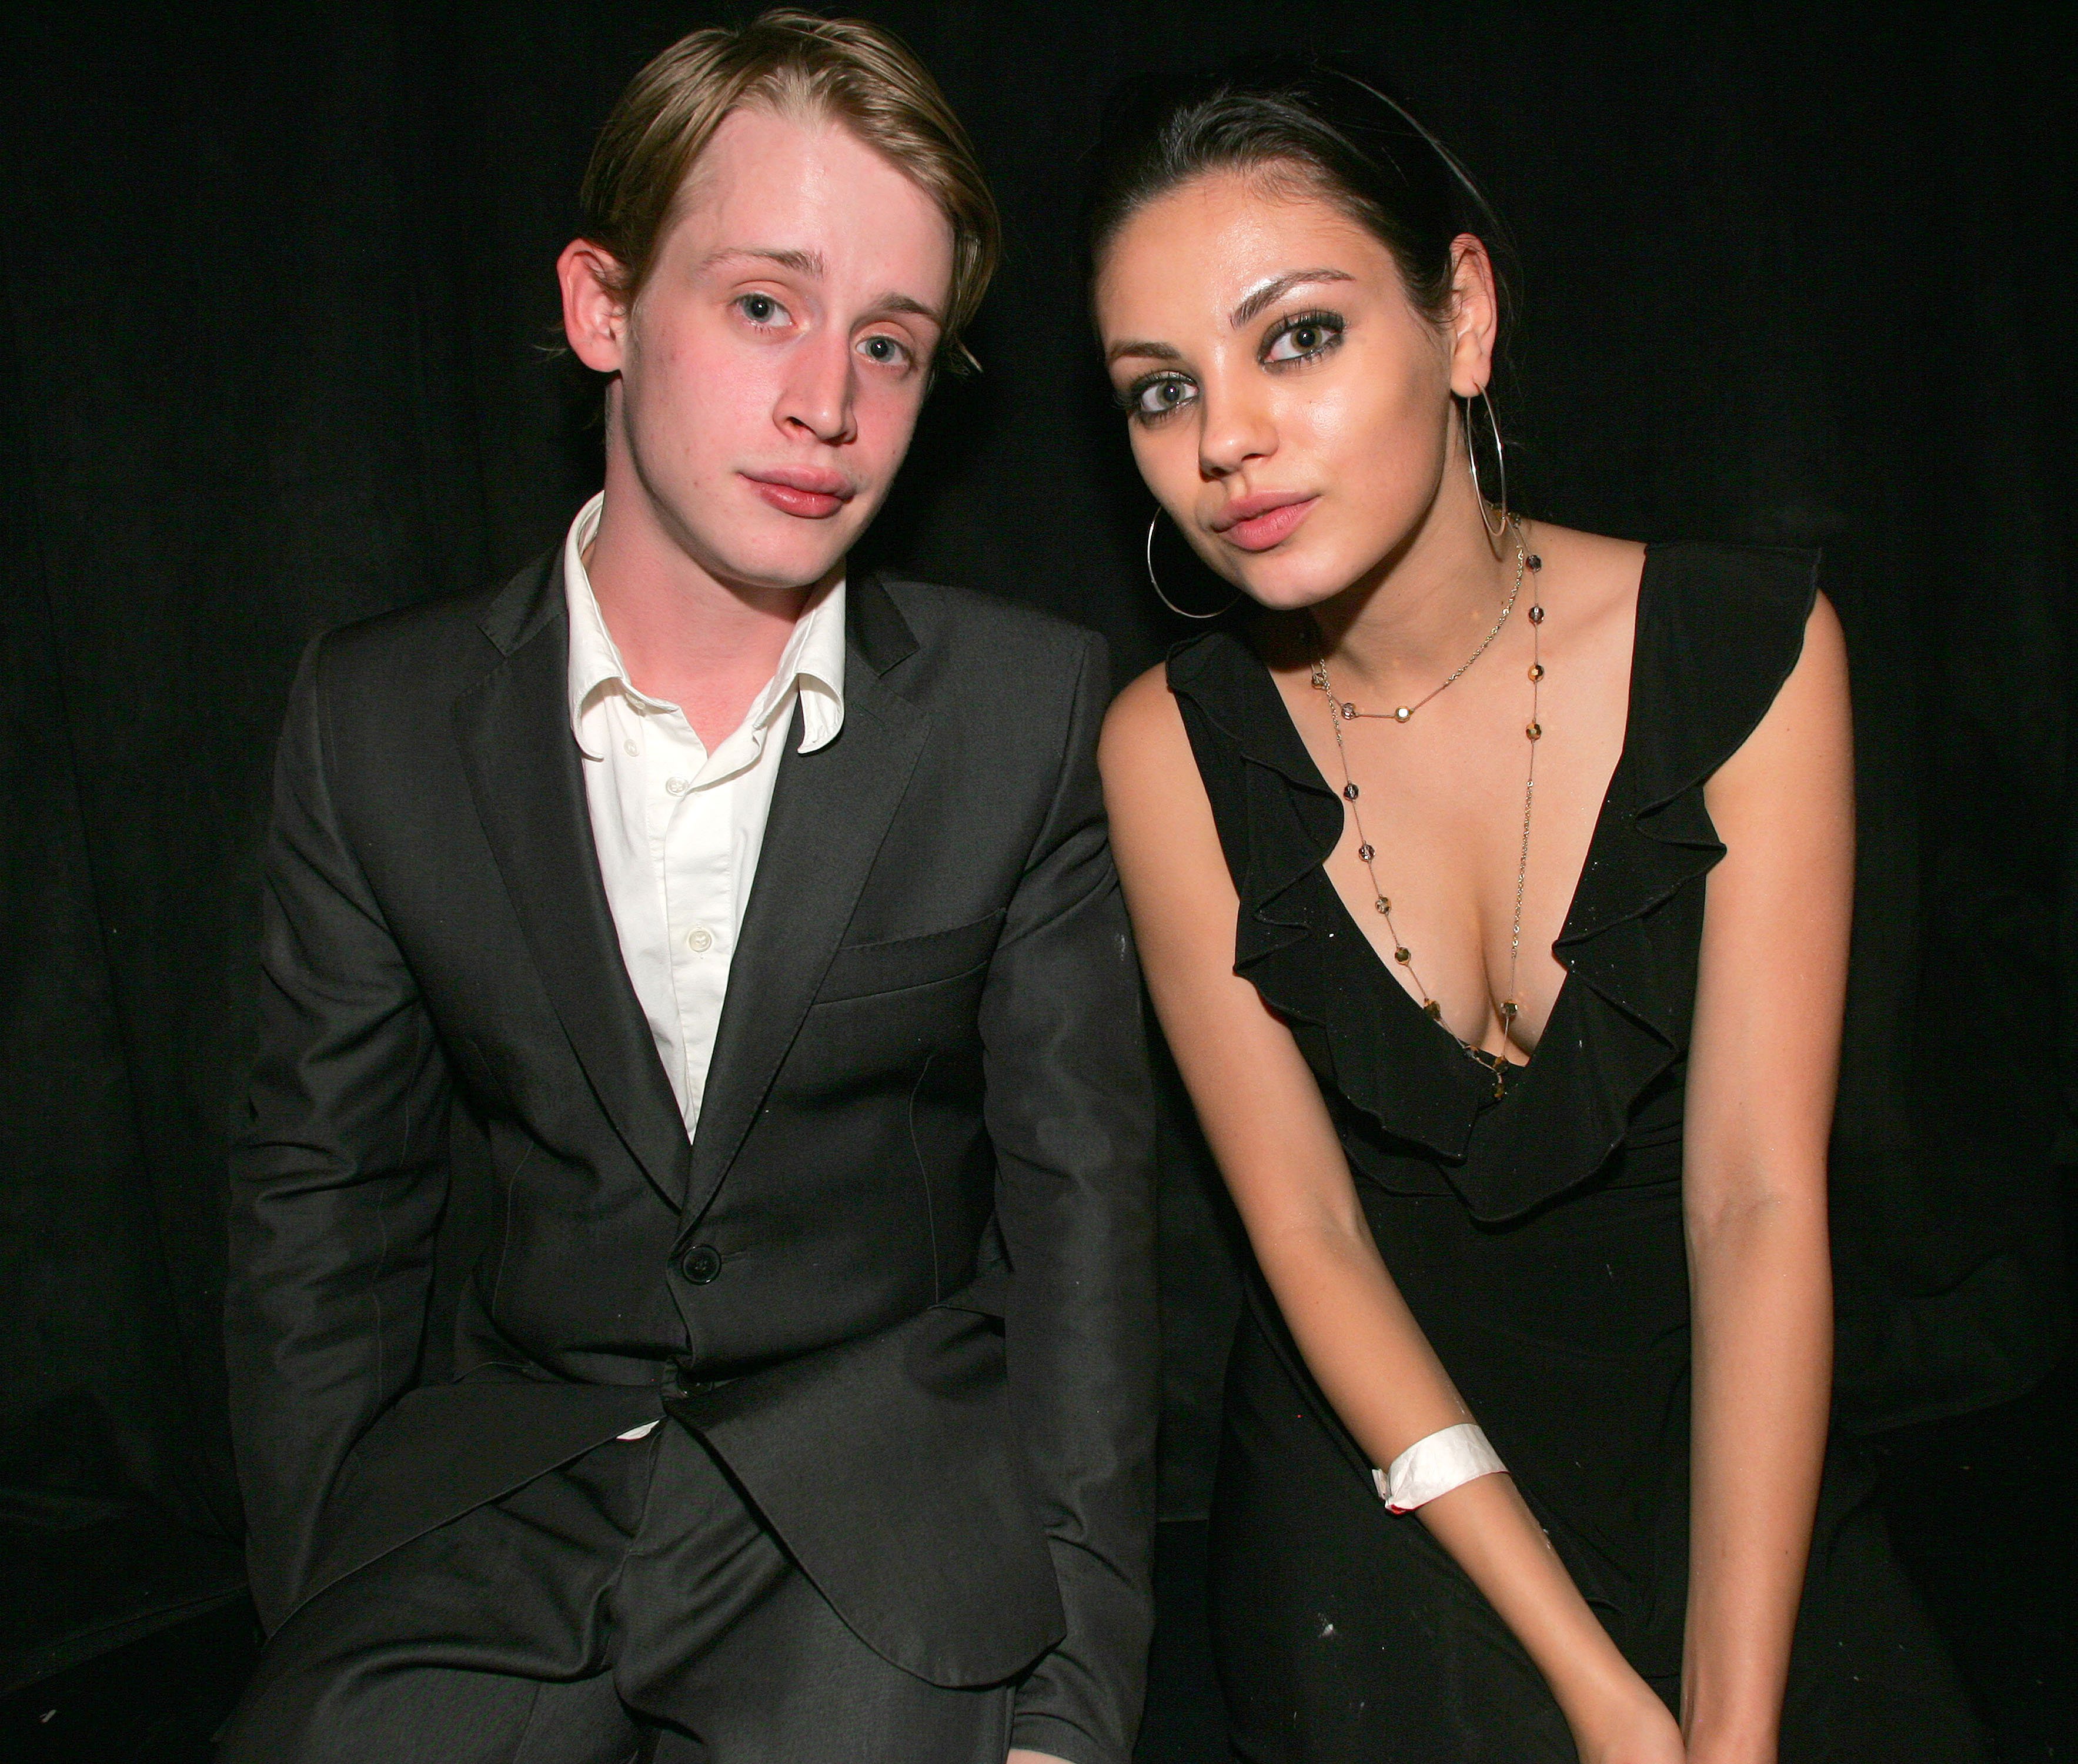 Macaulay Culkin and Mila Kunis at the Launch Celebrity Auction to Benefit Hurricane Victims in 2005 | Source: Getty Images